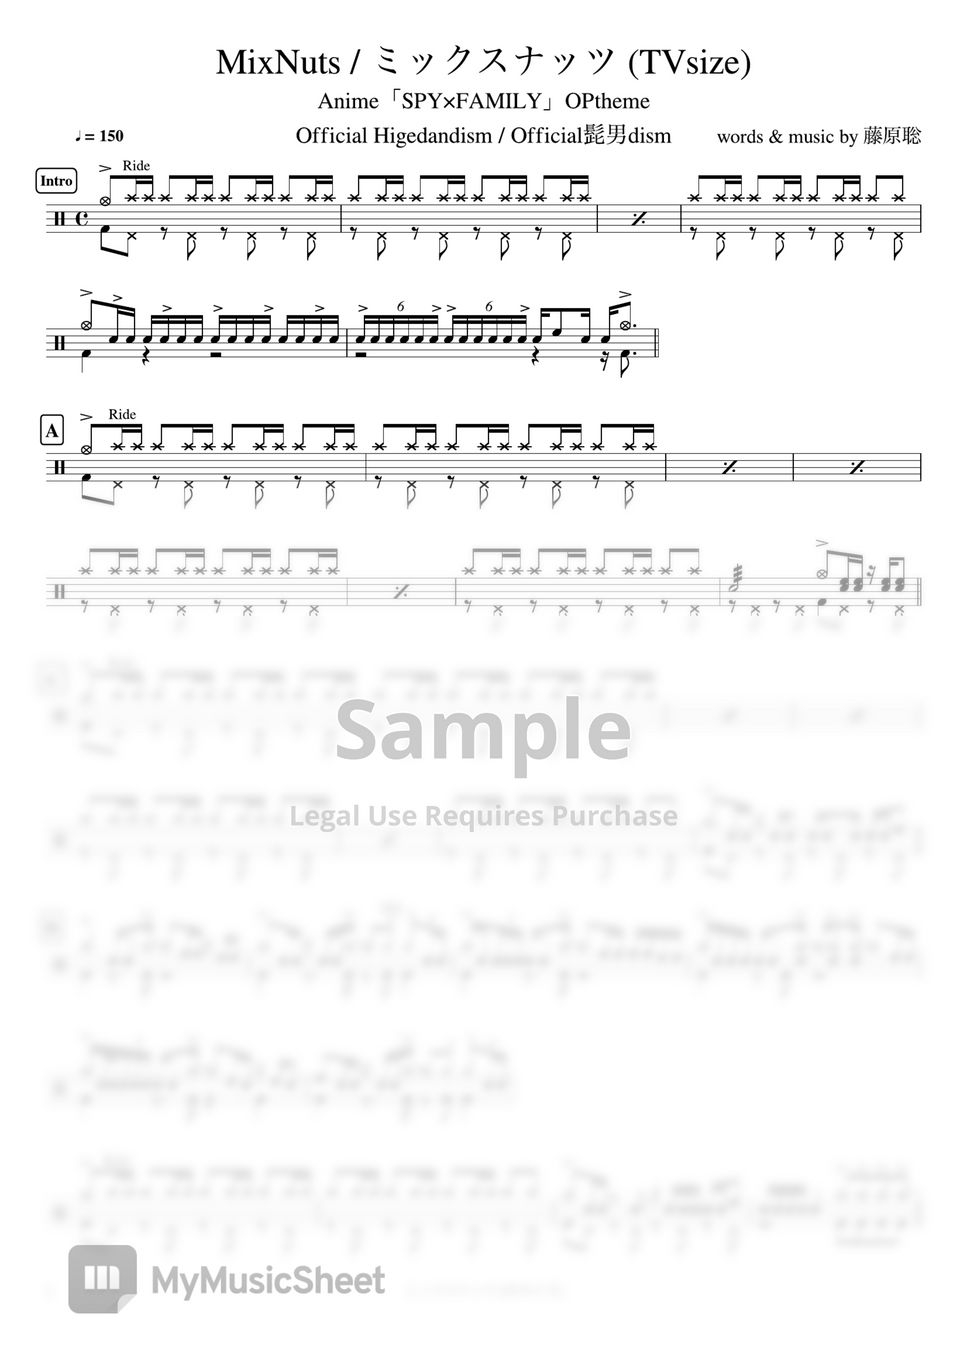 Official Higedandism / Official髭男dism - MixNuts / ミックスナッツ (TVsize) Anime「SPY×FAMILY」OPtheme by Cookai's J-pop Drum sheet music!!!